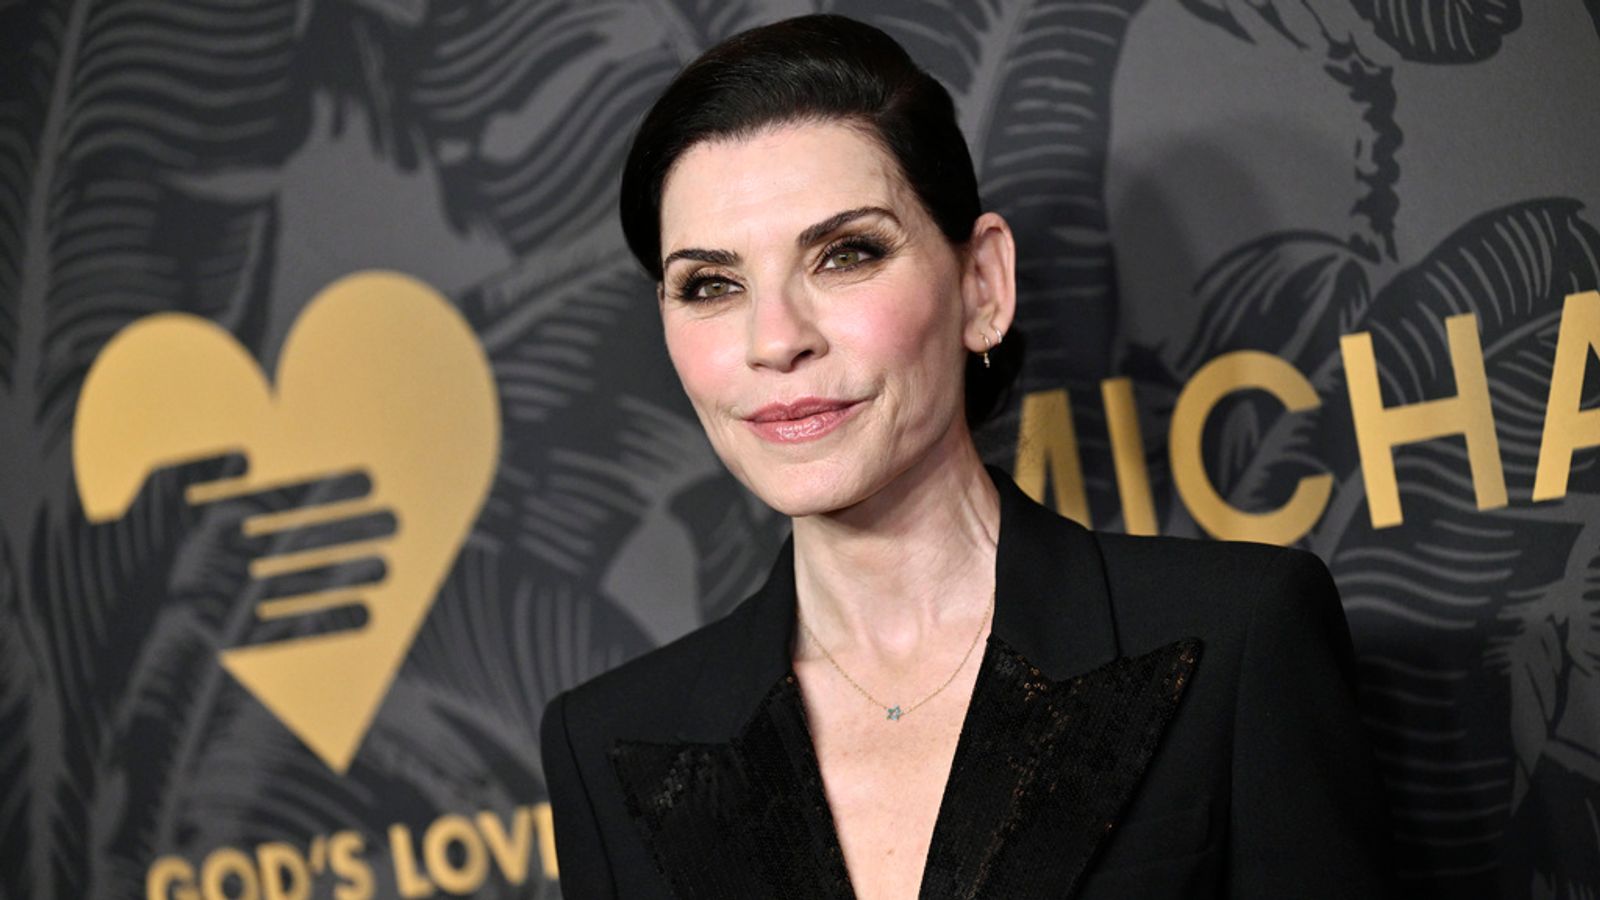 Julianna Margulies Apologizes For Controversial Comments On Black People And Jews